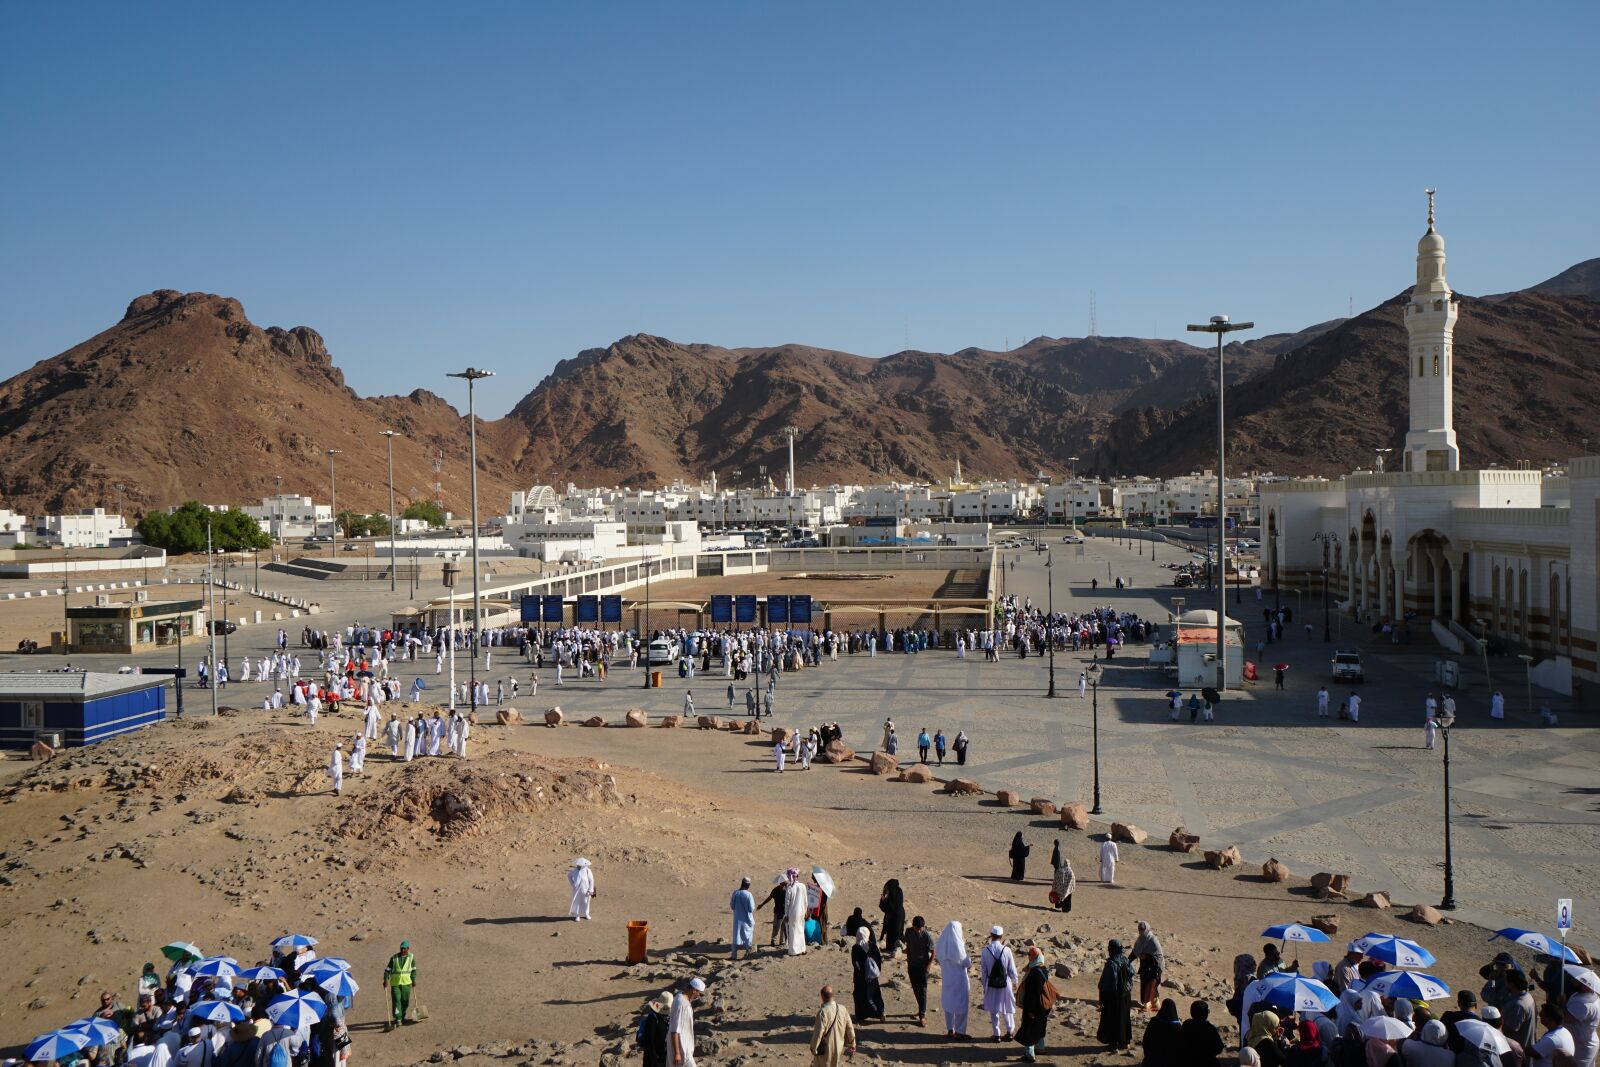 Sony a6300 sample photo. Uhud, the mountain of photography